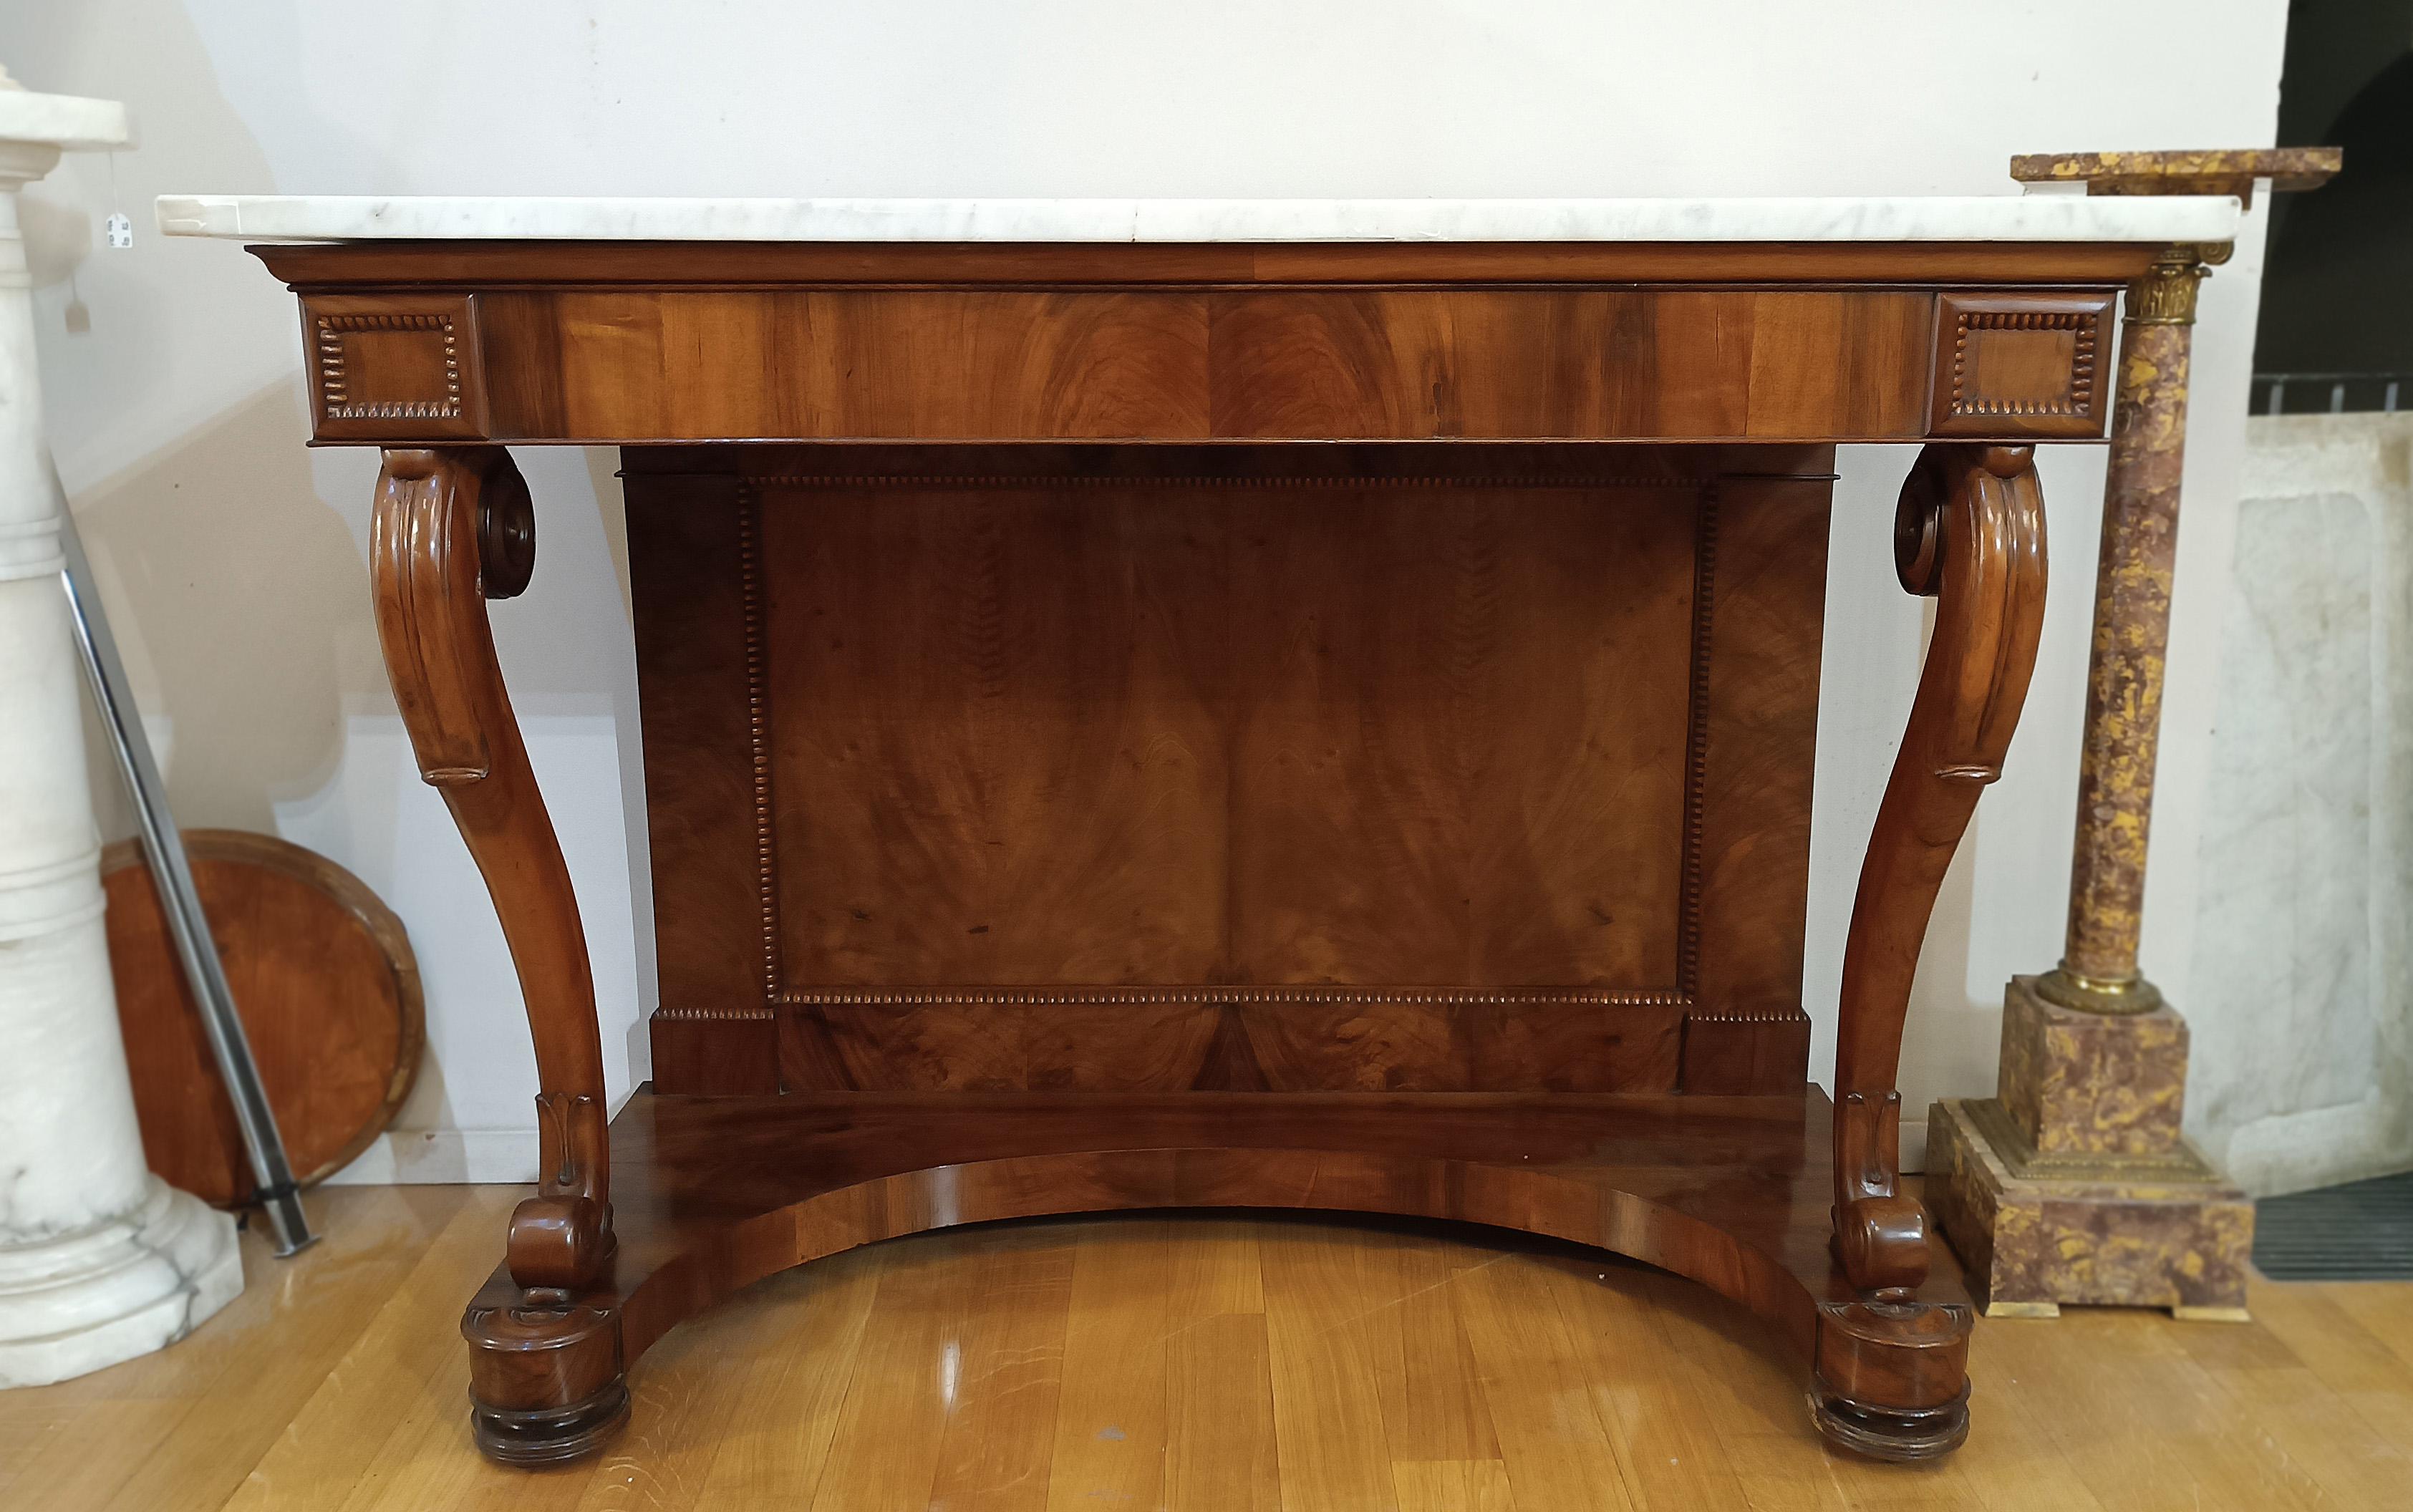 Beautiful console table belonging to the Charles X period. The piece of furniture was made of solid walnut, finished with walnut veneer and features an elegant white Carrara marble top. The shelf legs are finely finished in a curl, adding a touch of